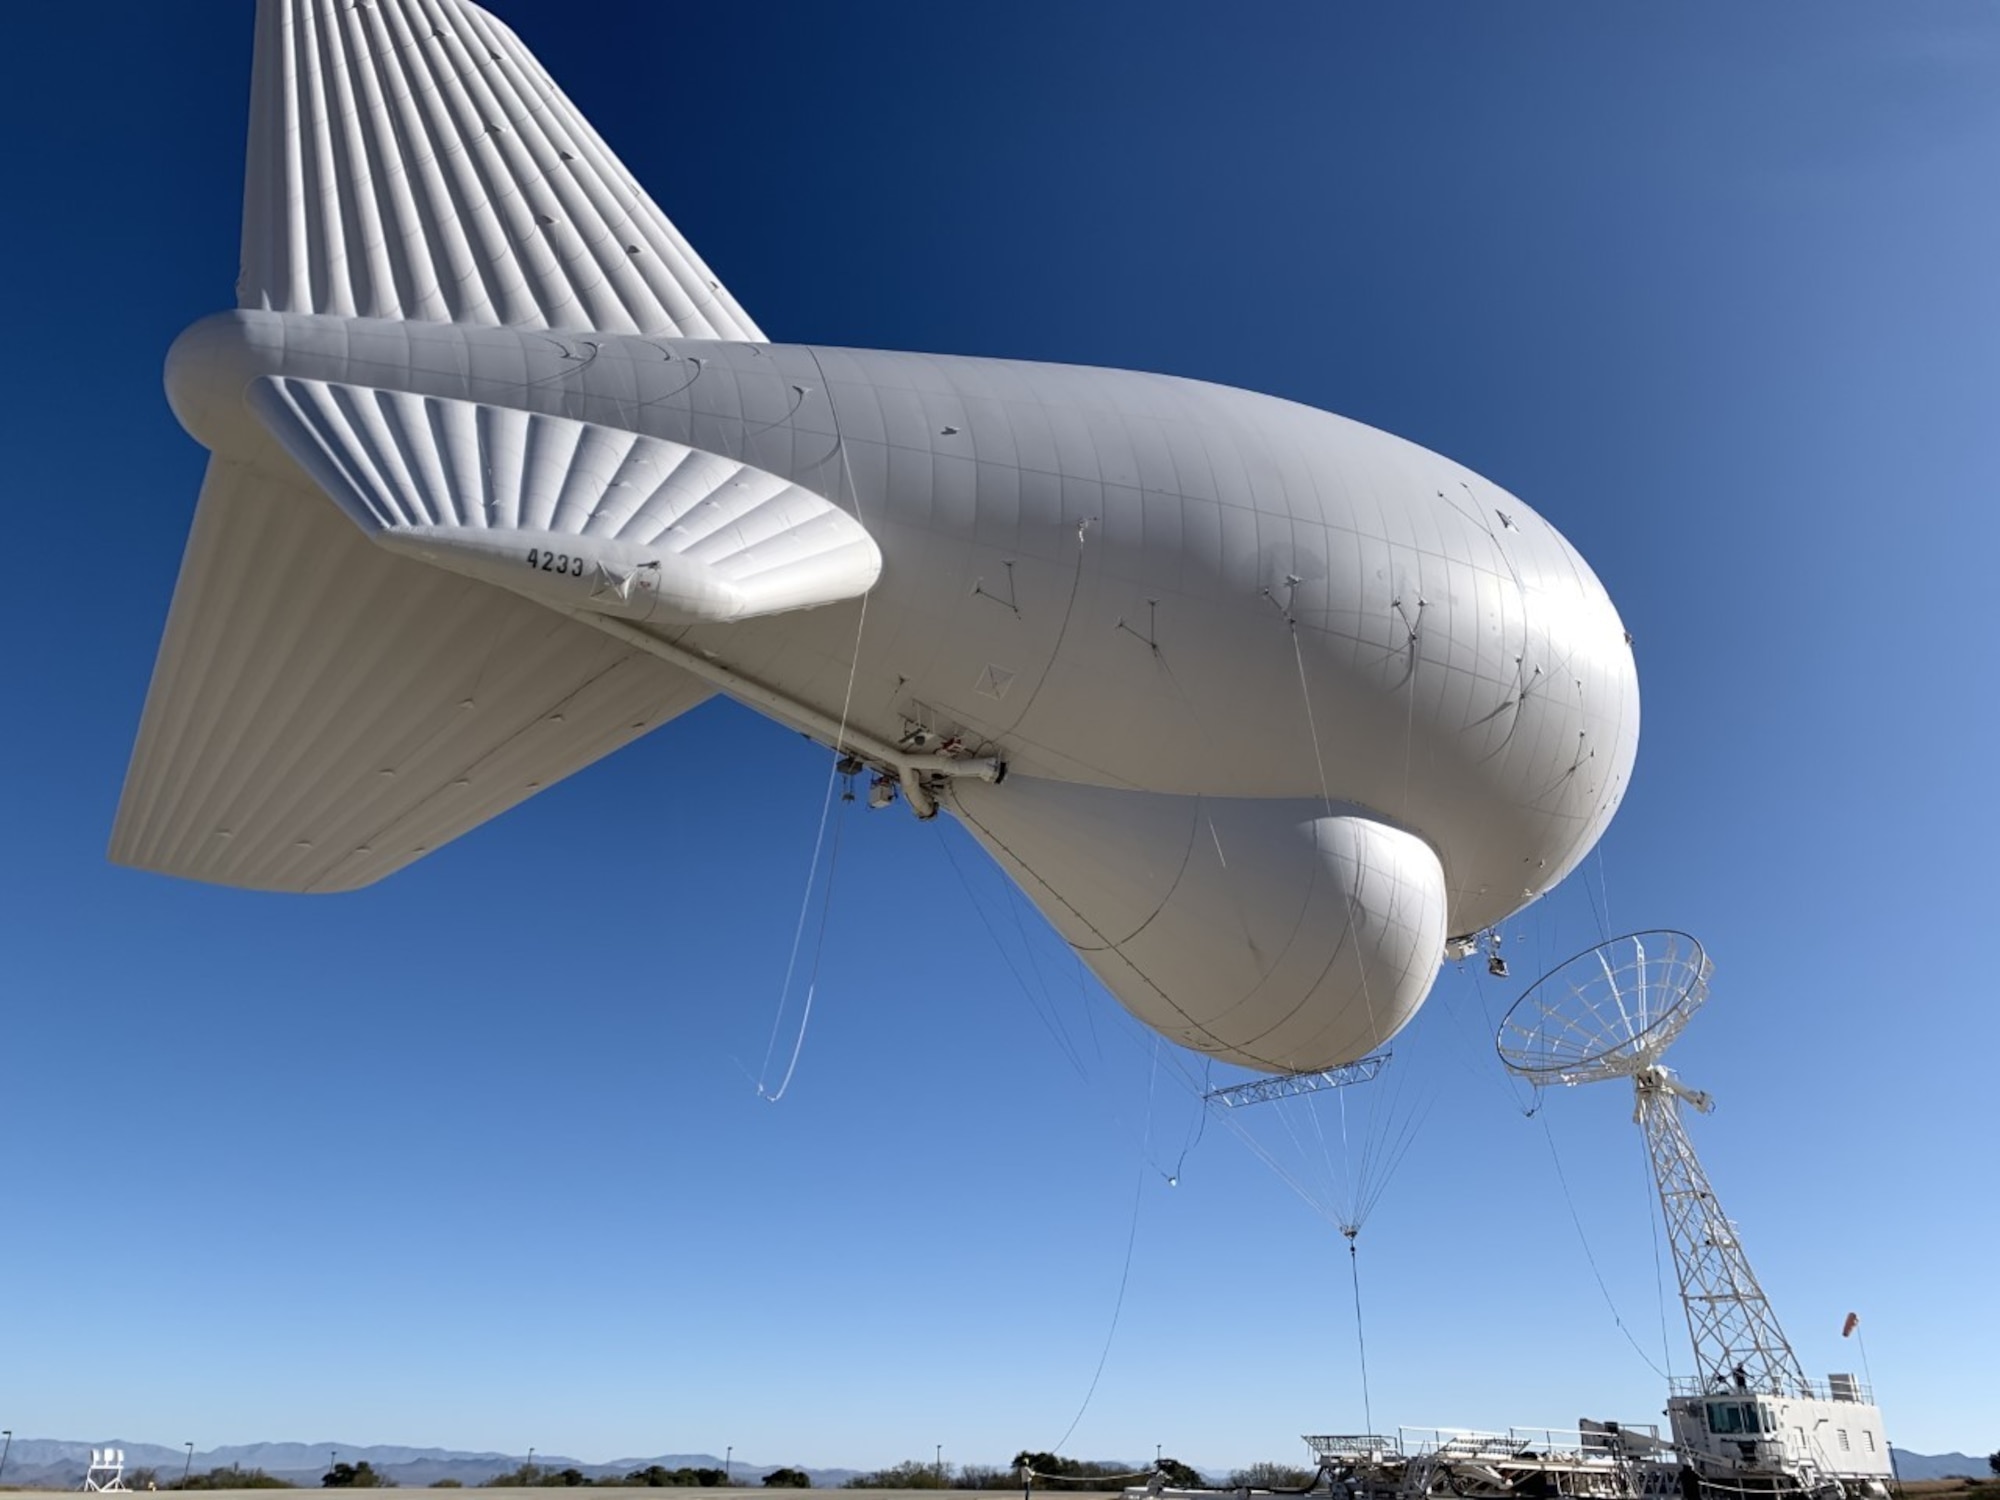 Image is a tethered aerostat radar system (TARS) device being optimized by personnel.